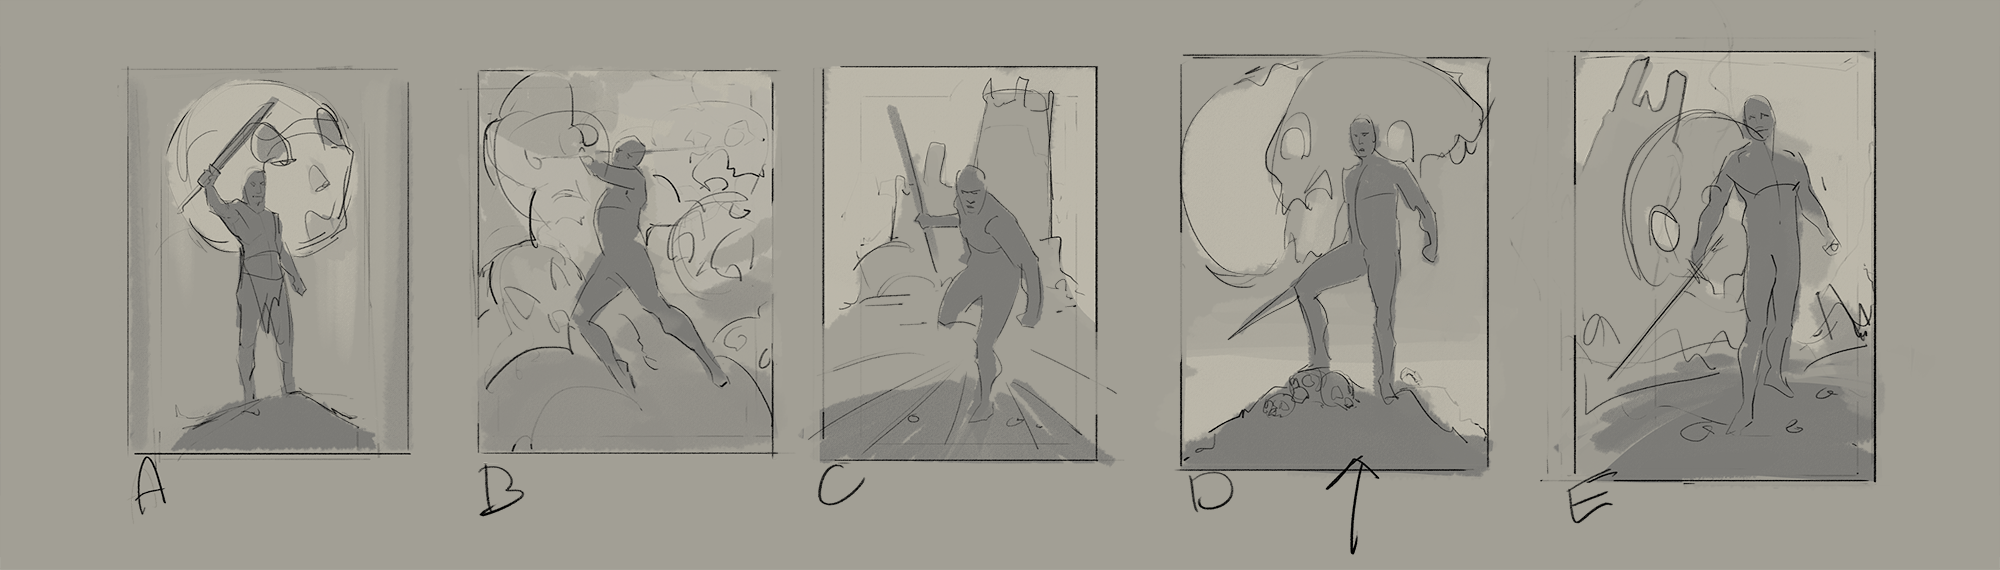 Sketches for Conan Exiles 3rd Year Anniversary image